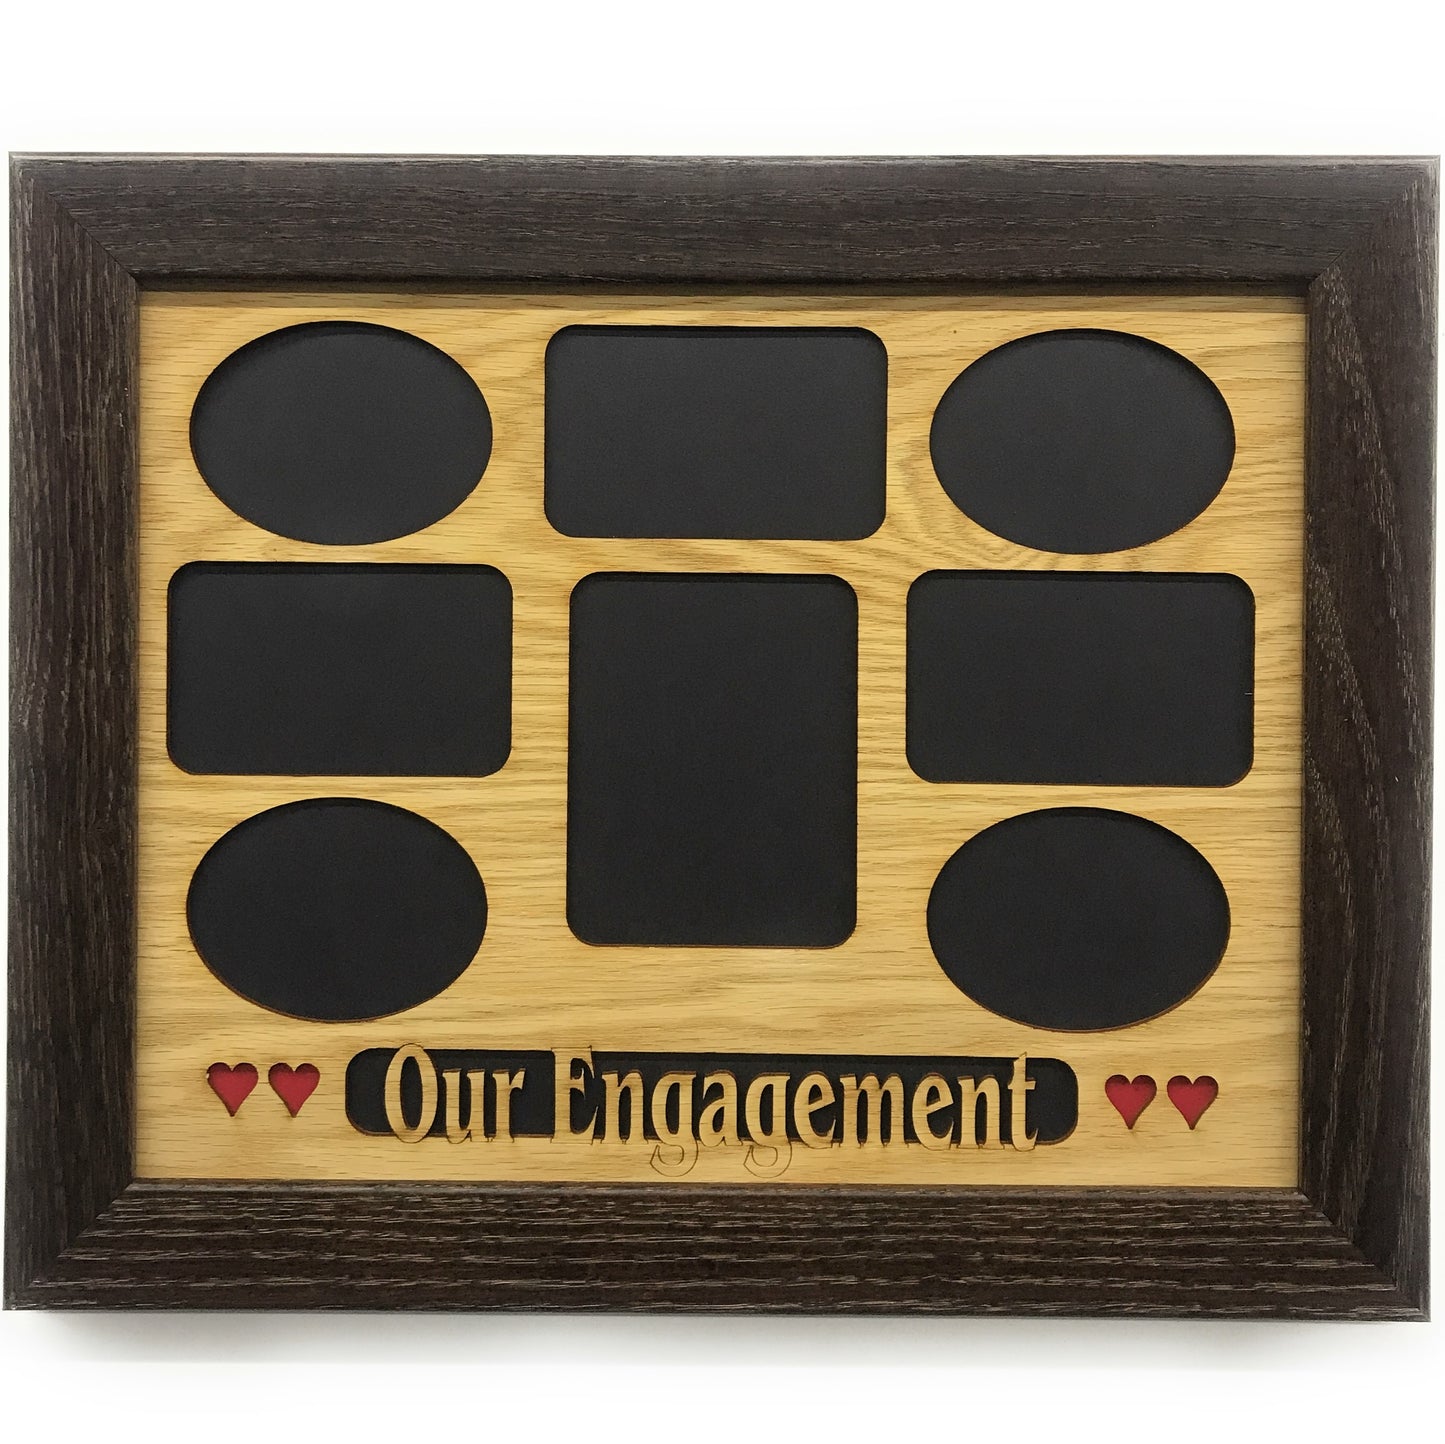 Our Engagement Picture Frame 11"x14"